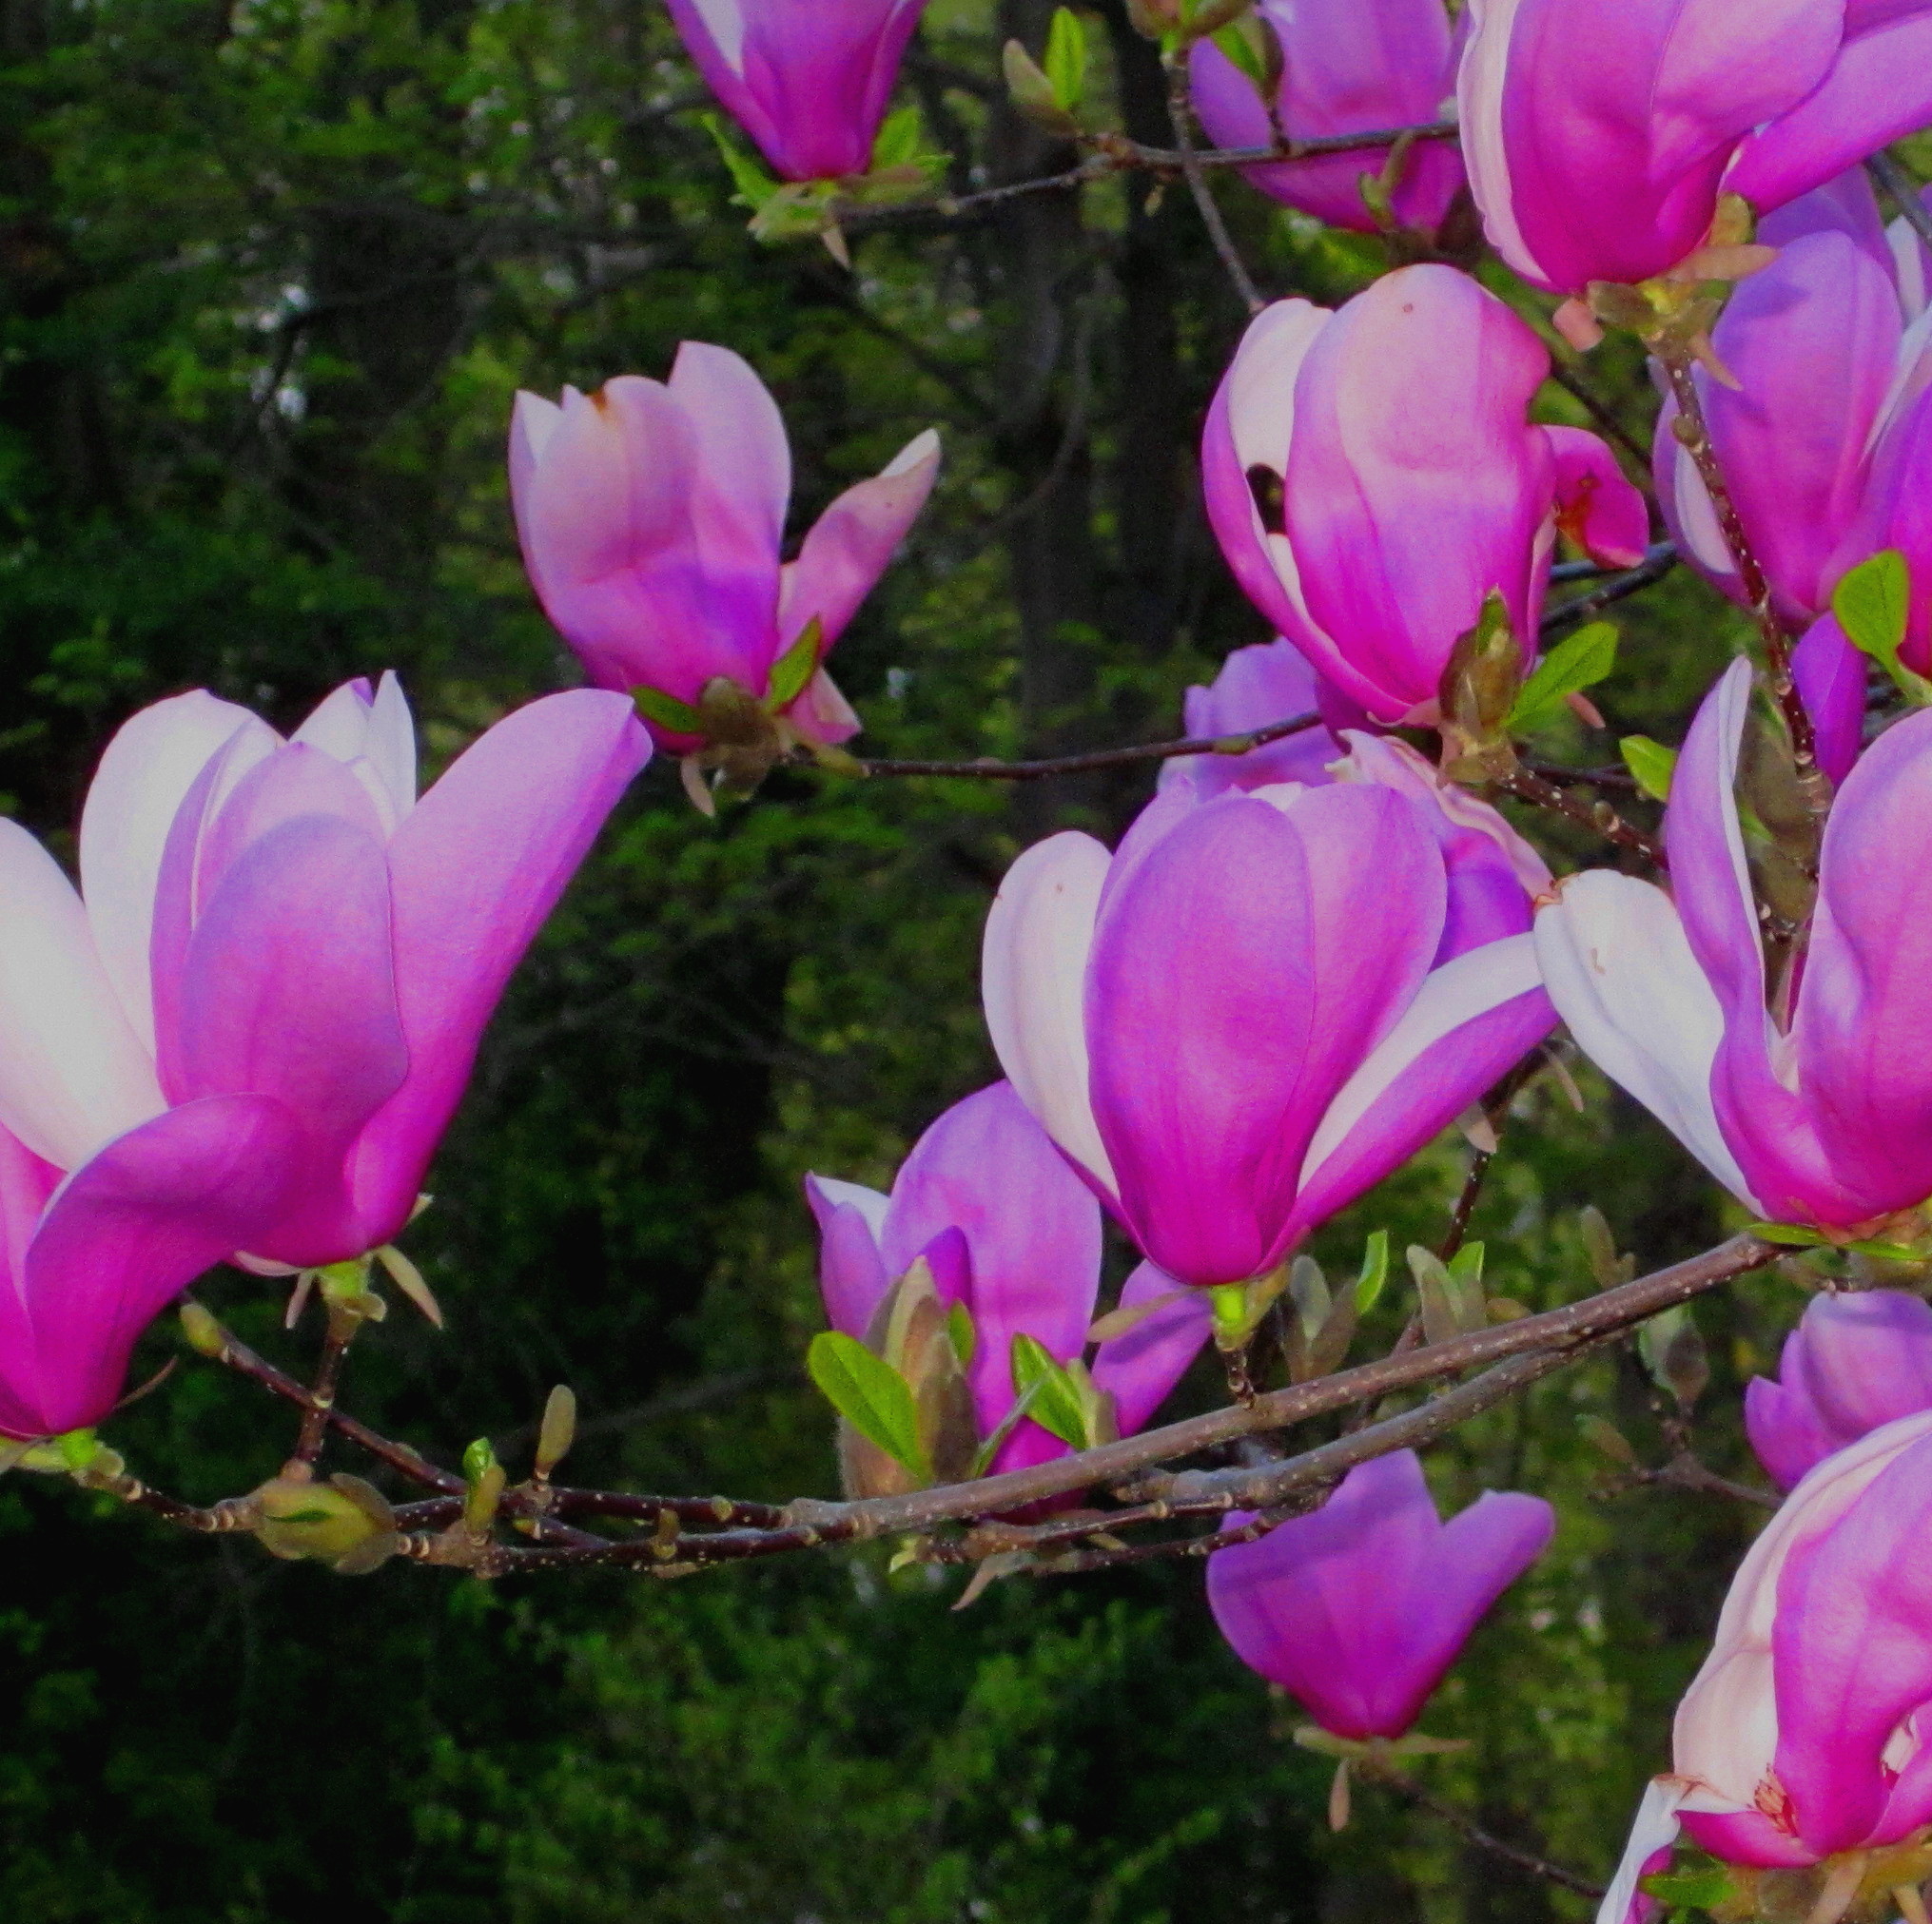 Tulips Trees (user submitted)